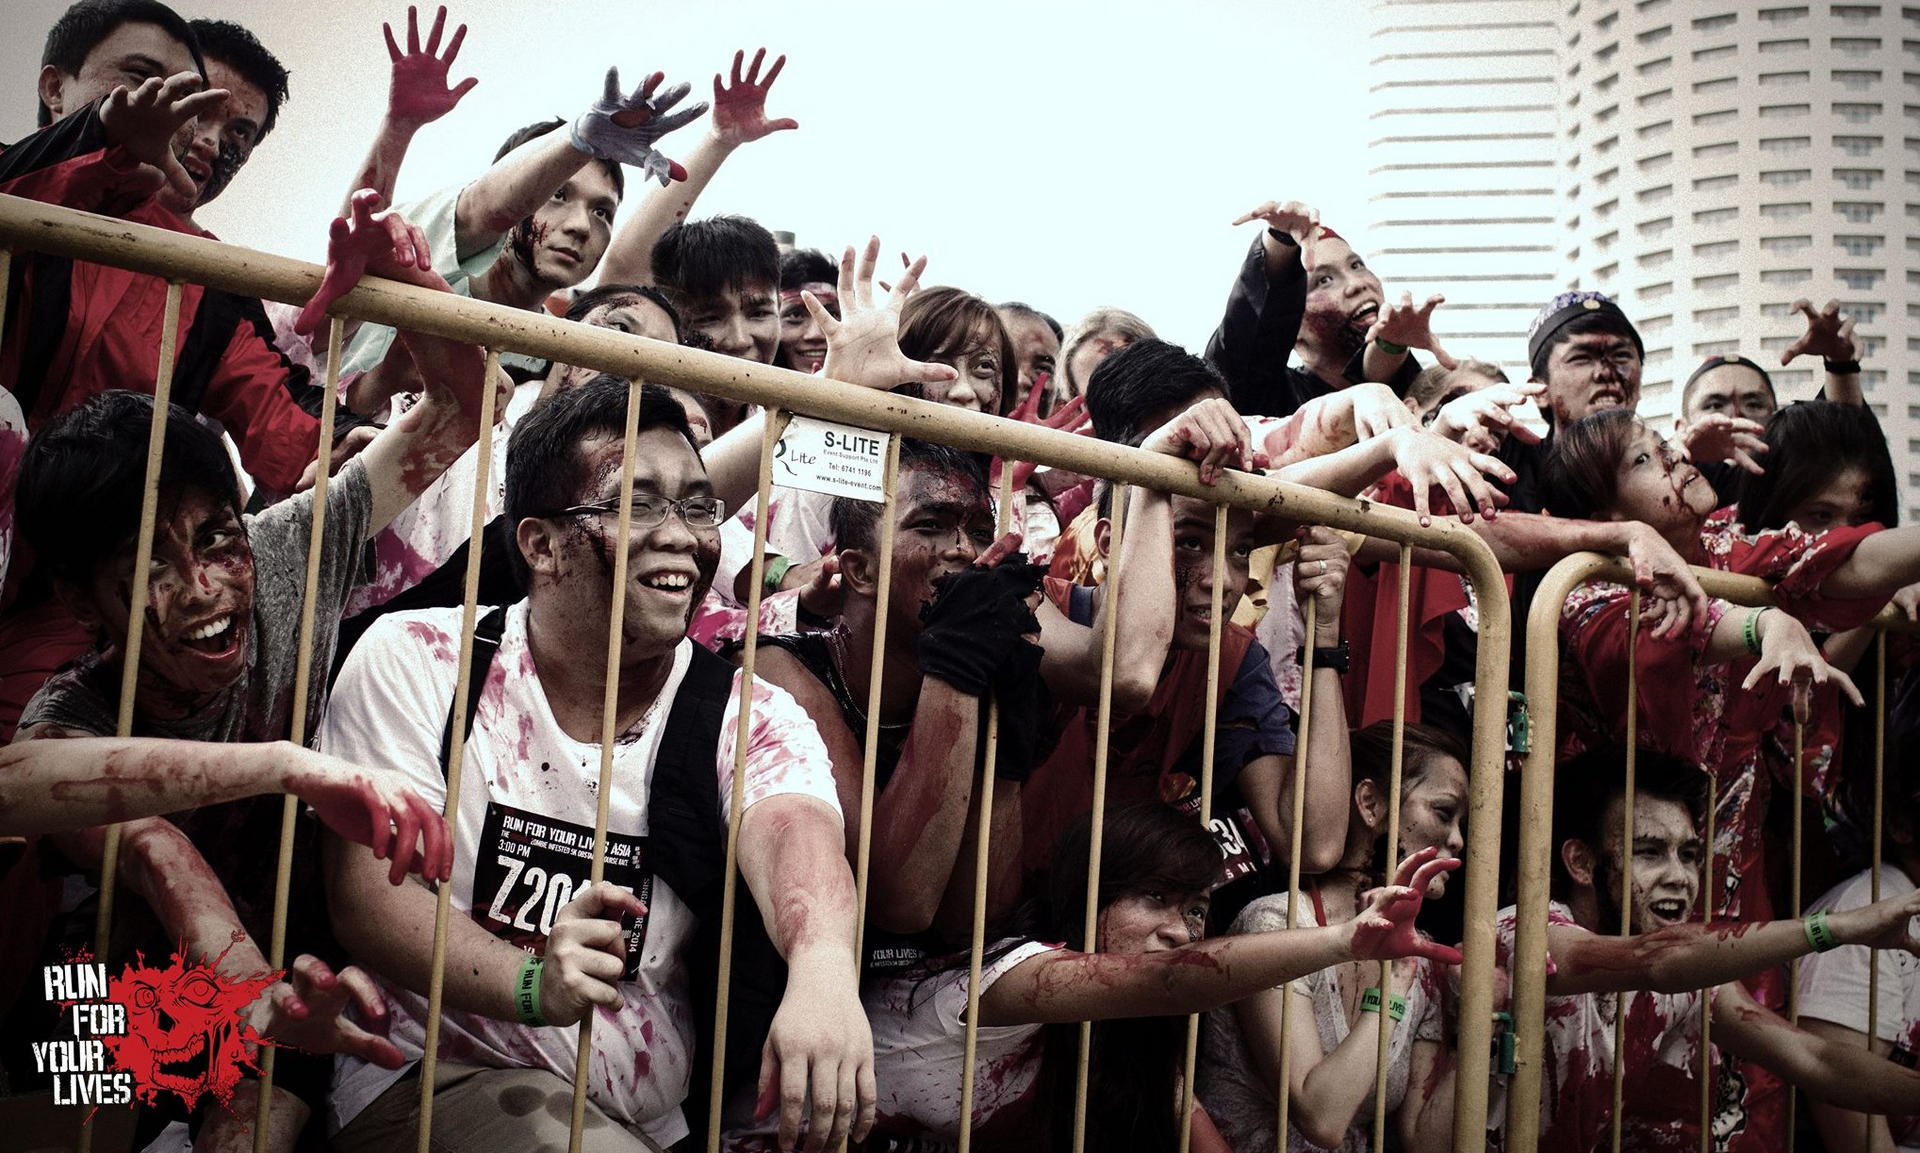 Up to 12,000 people are expected to take part in the 5km zombie race.